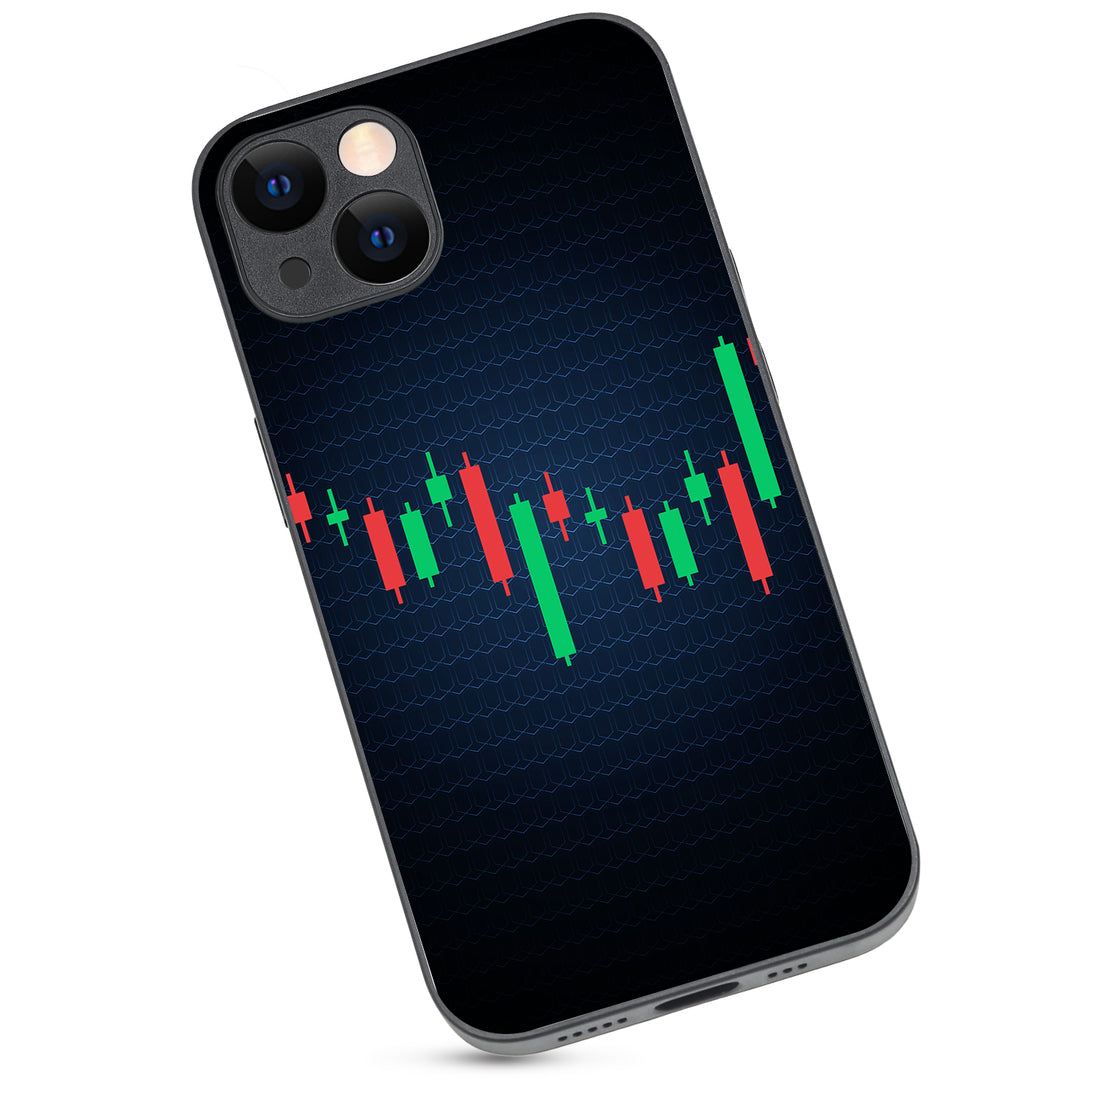 Candlestick Trading iPhone 13 Case